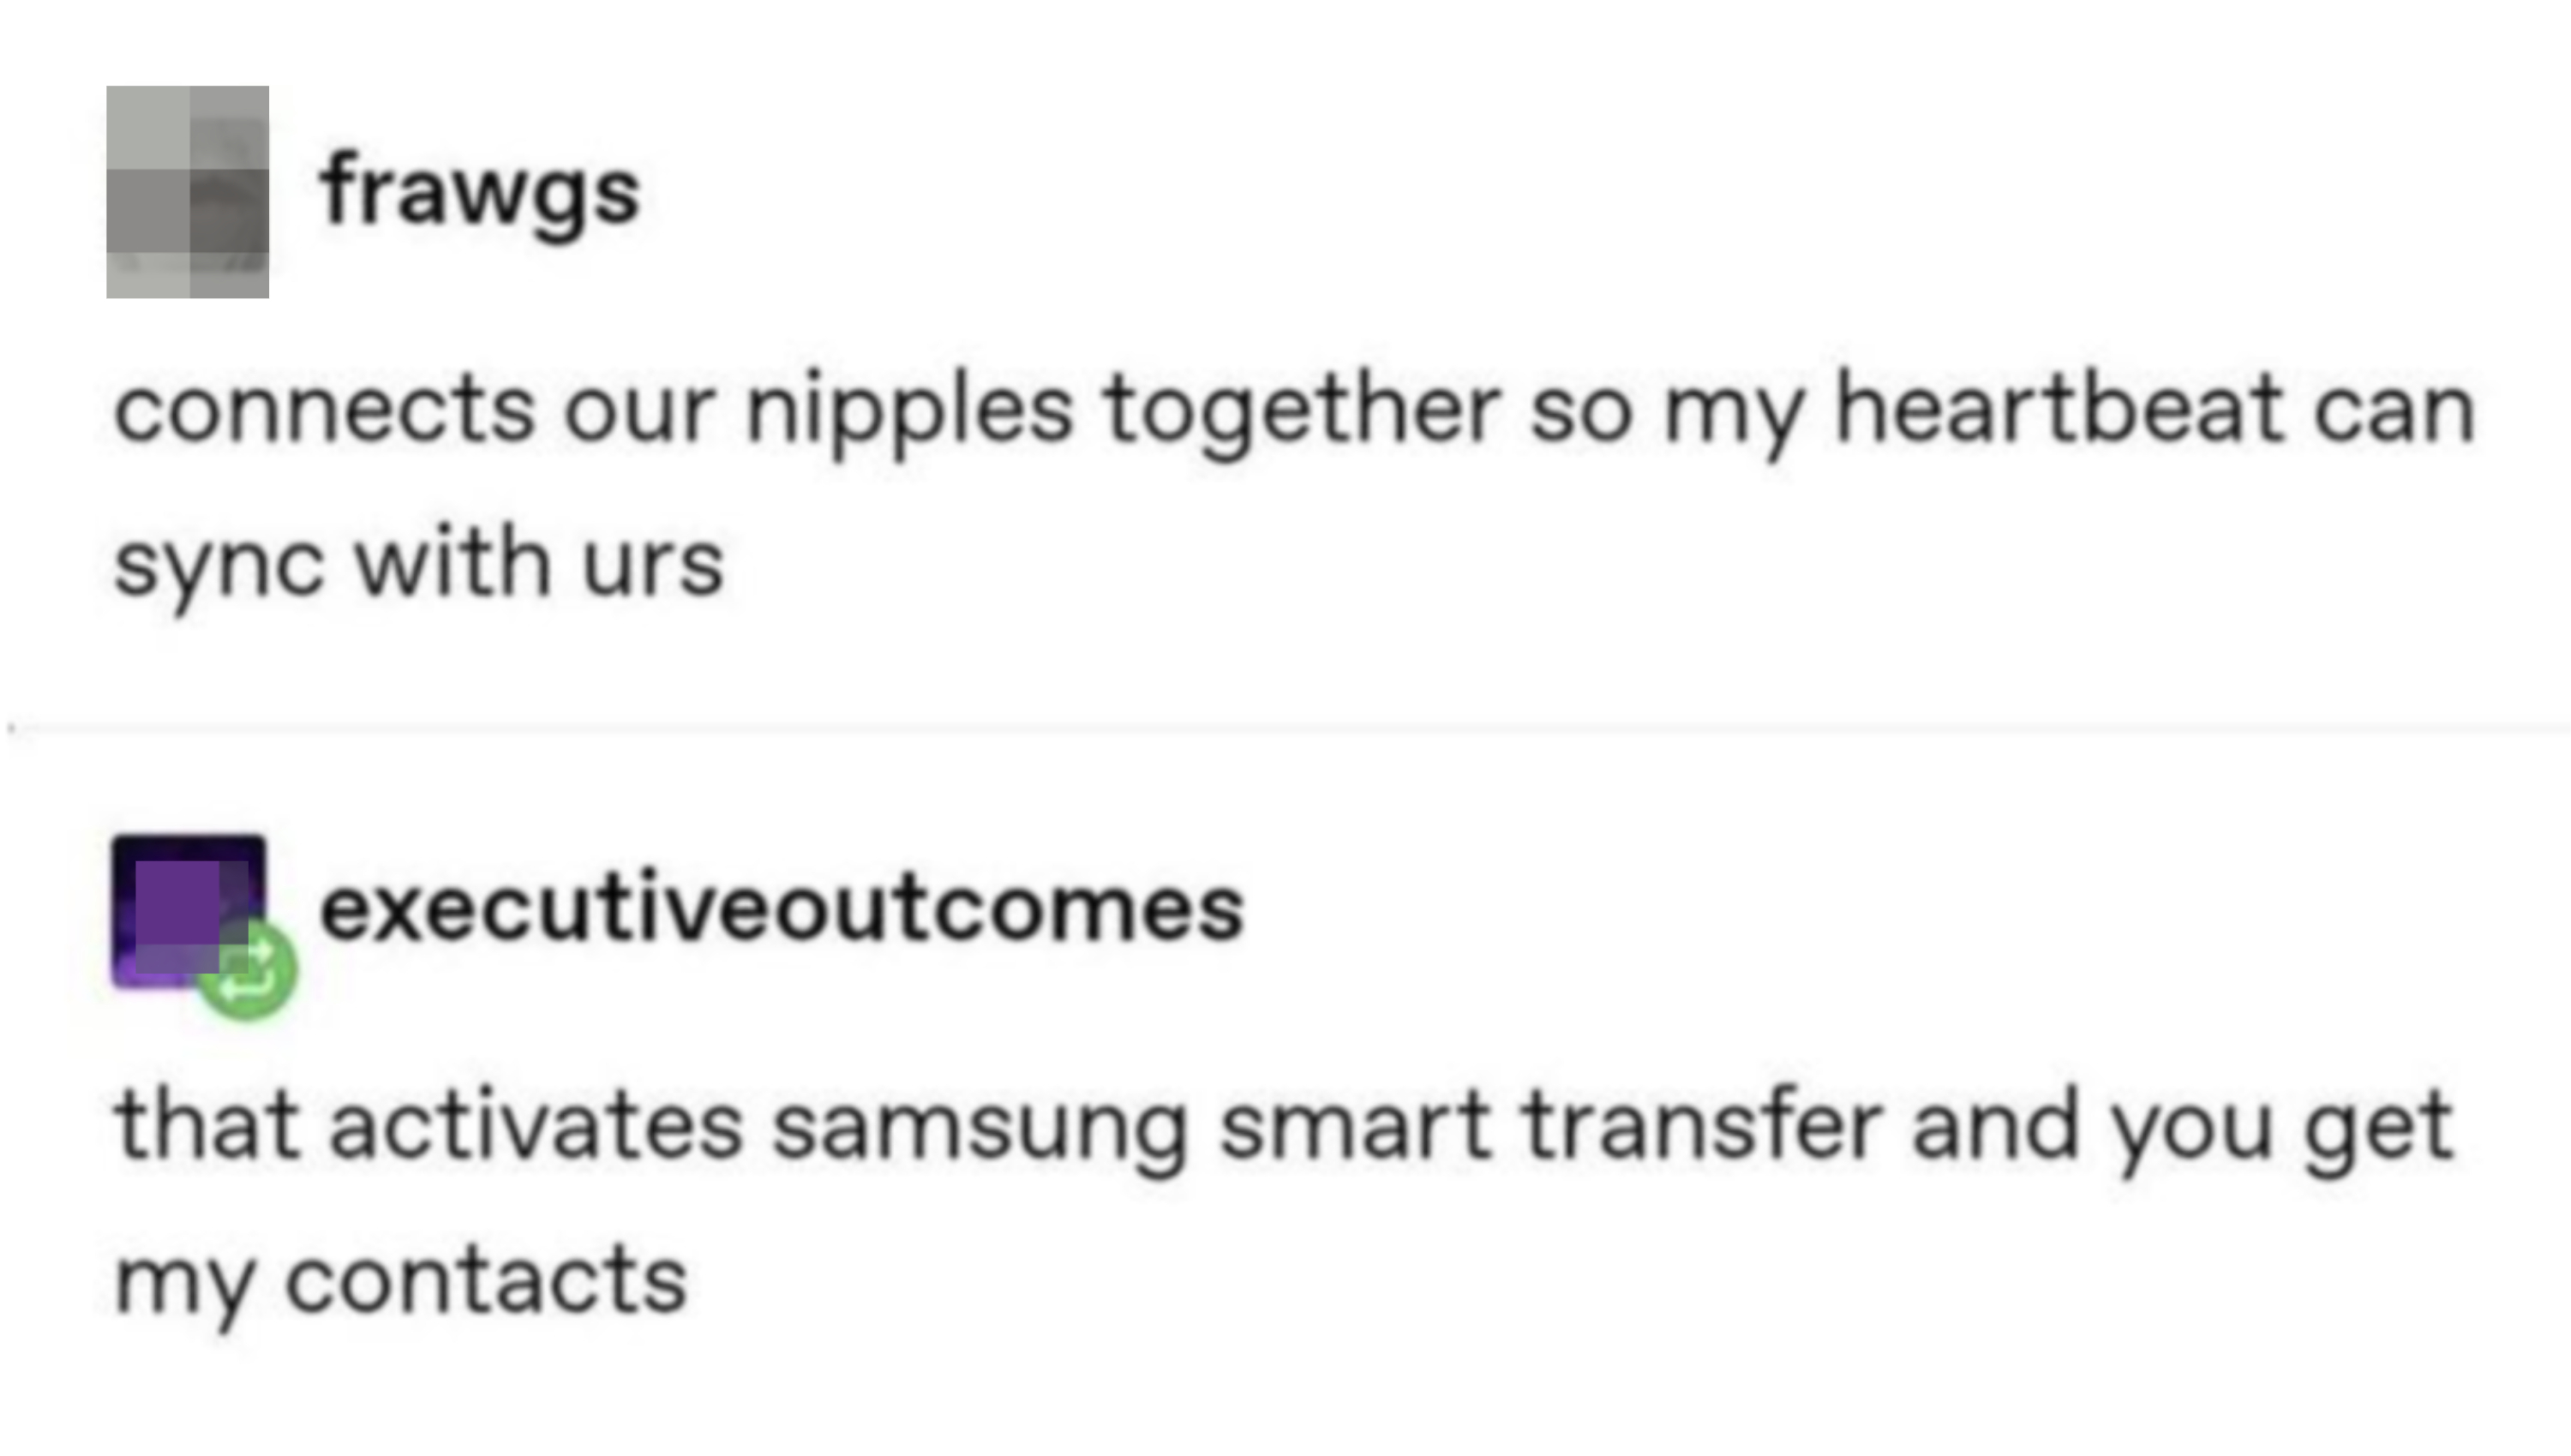 &quot;Connects our nipples together so my heartbeat can sync with yours,&quot; &quot;That activates Samsung smart transfer and you get my contacts&quot;